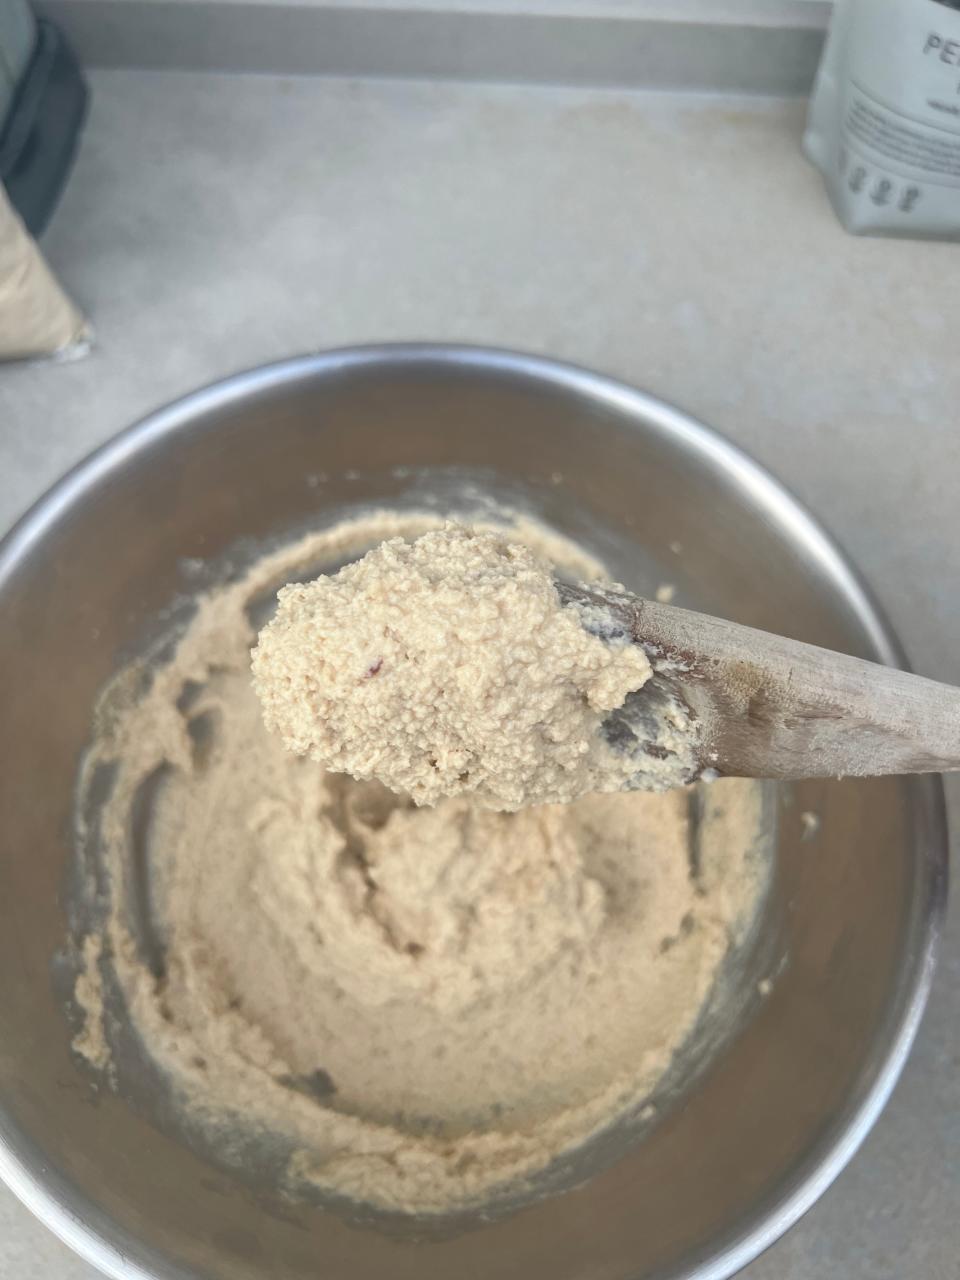 A closer look at the texture of the mixture.